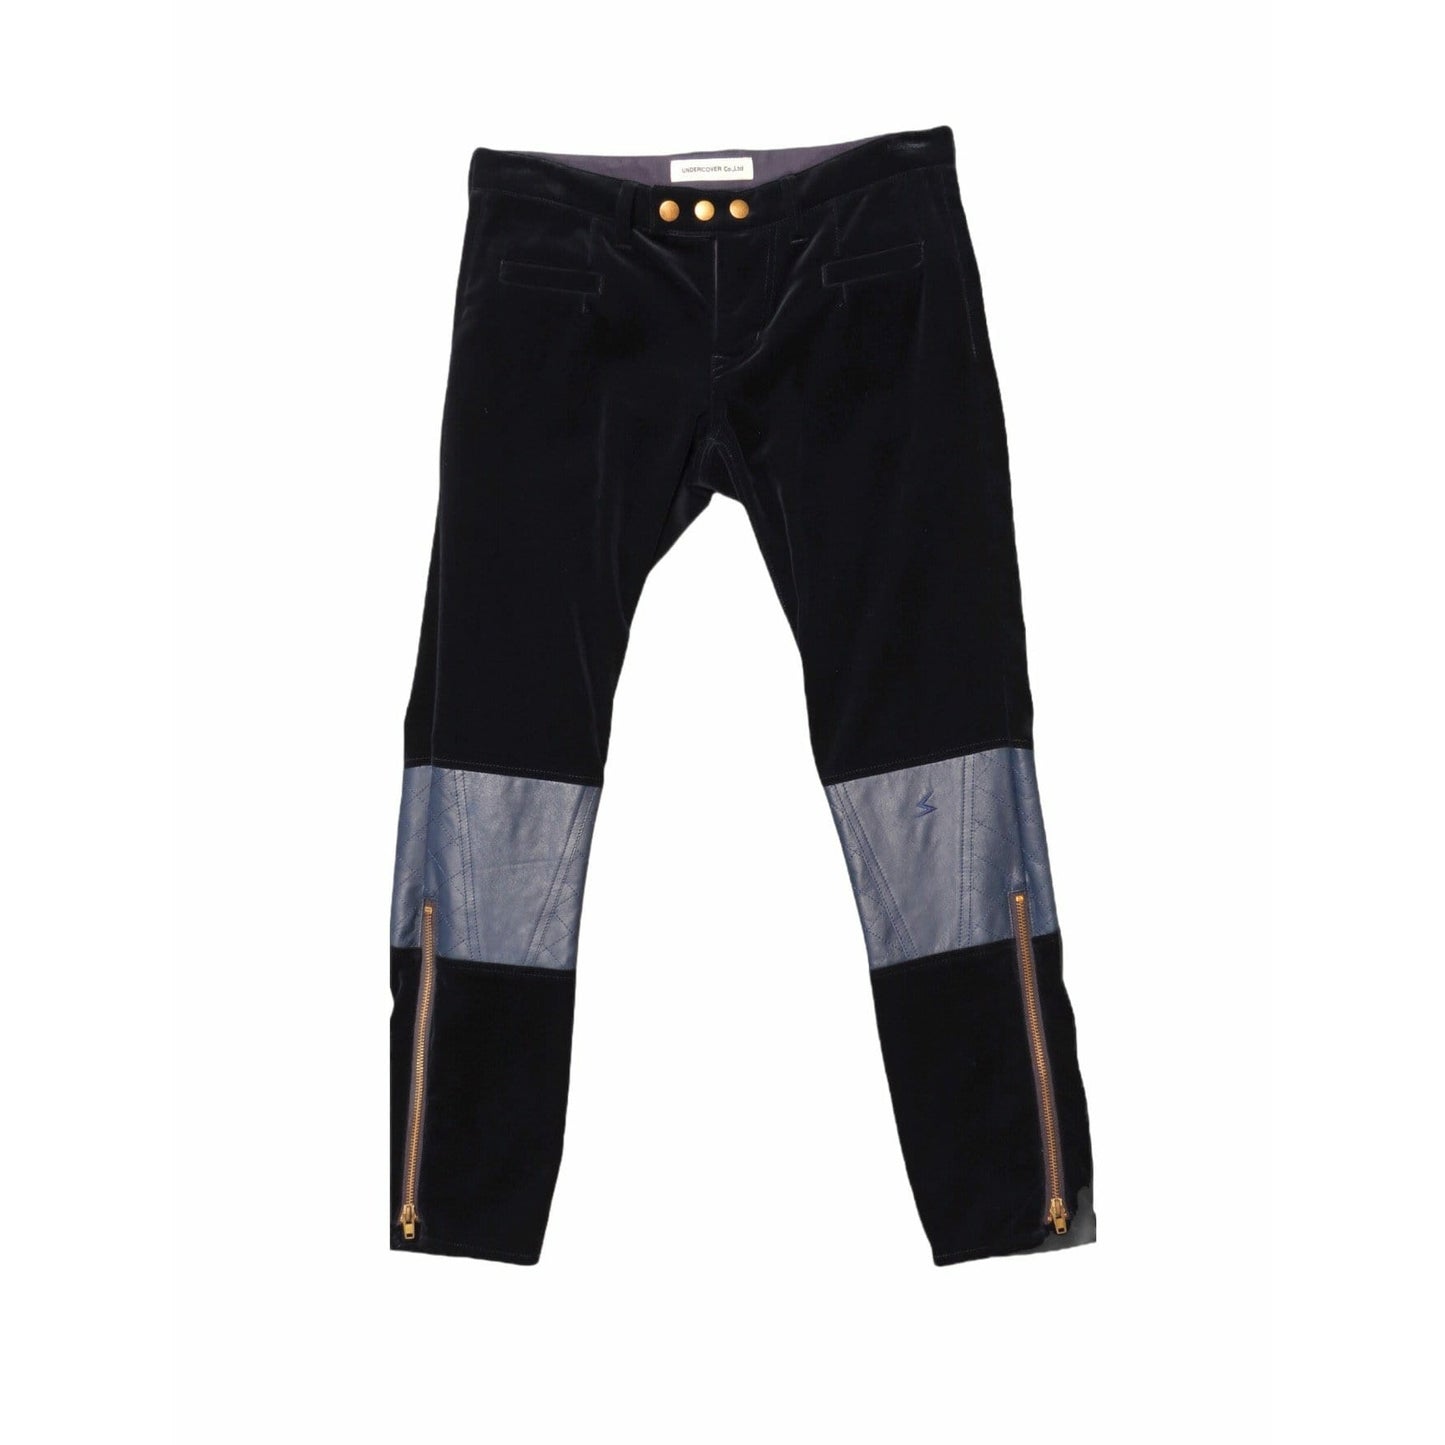 Pants undercover-straight-pant-1 Black